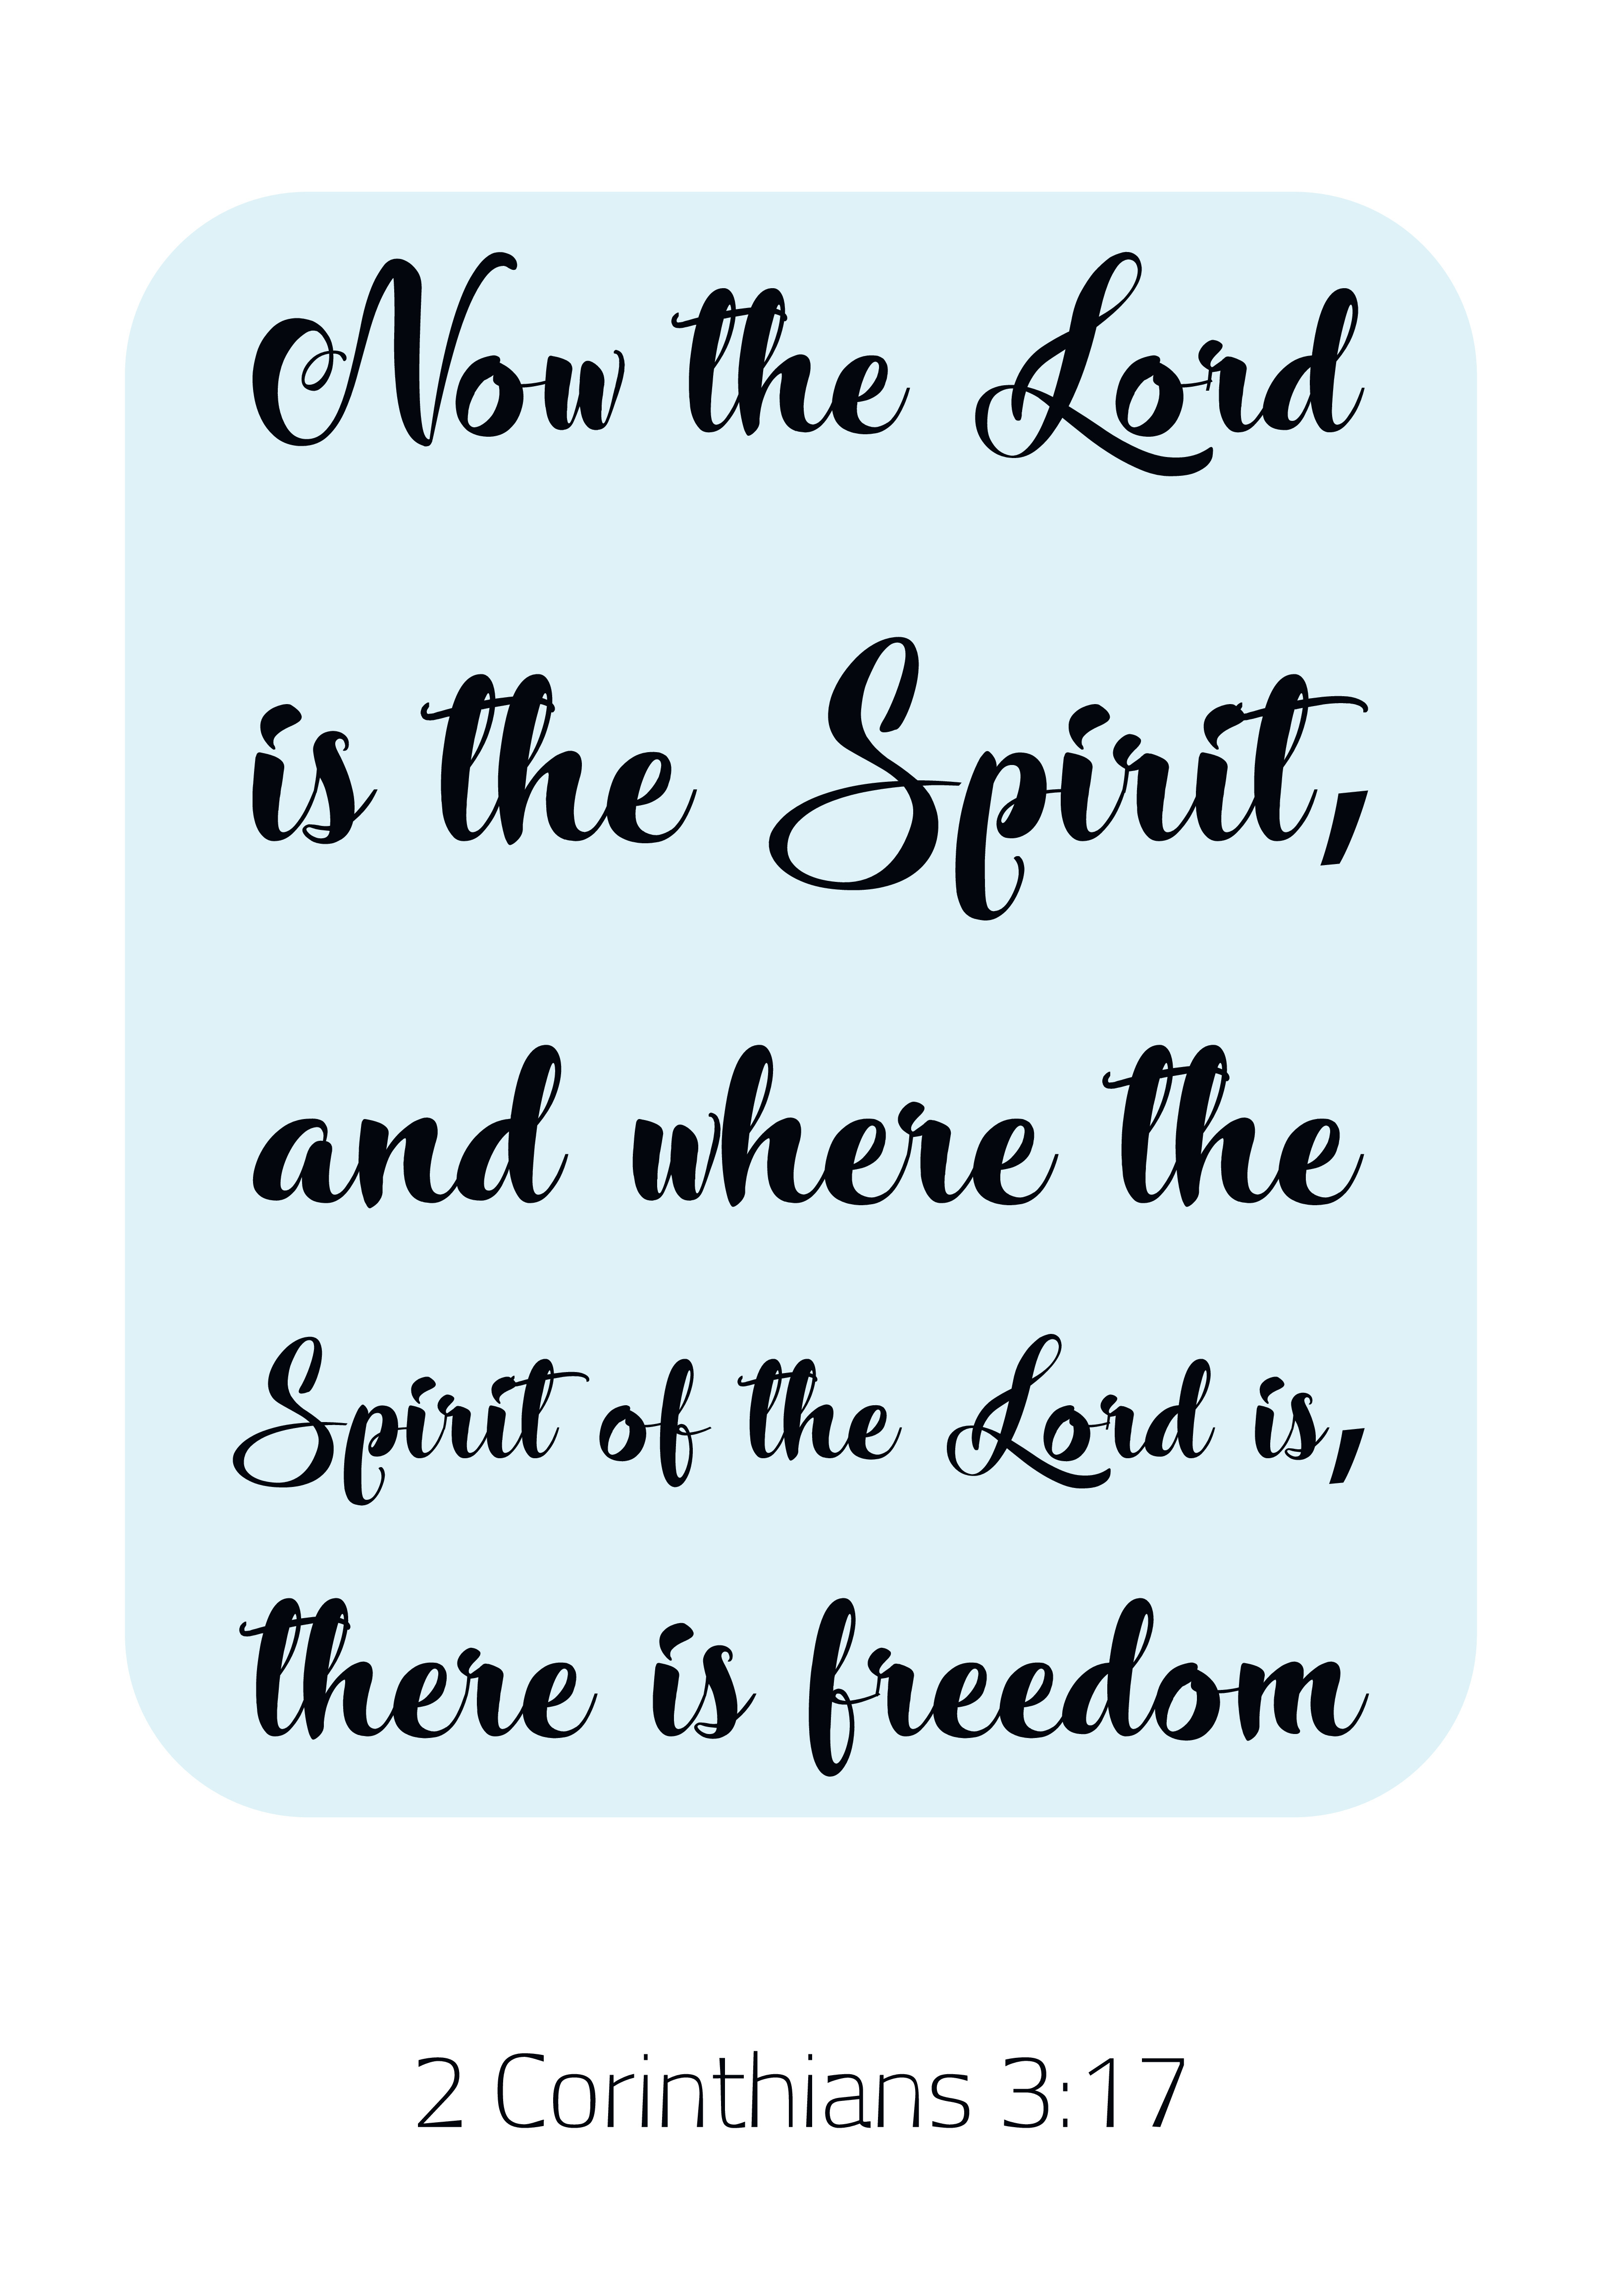 2 Corinthians 2:17 "Now the Lord is the Spirit, and where the Spirit of the Lord is, there is freedom written in a script font.